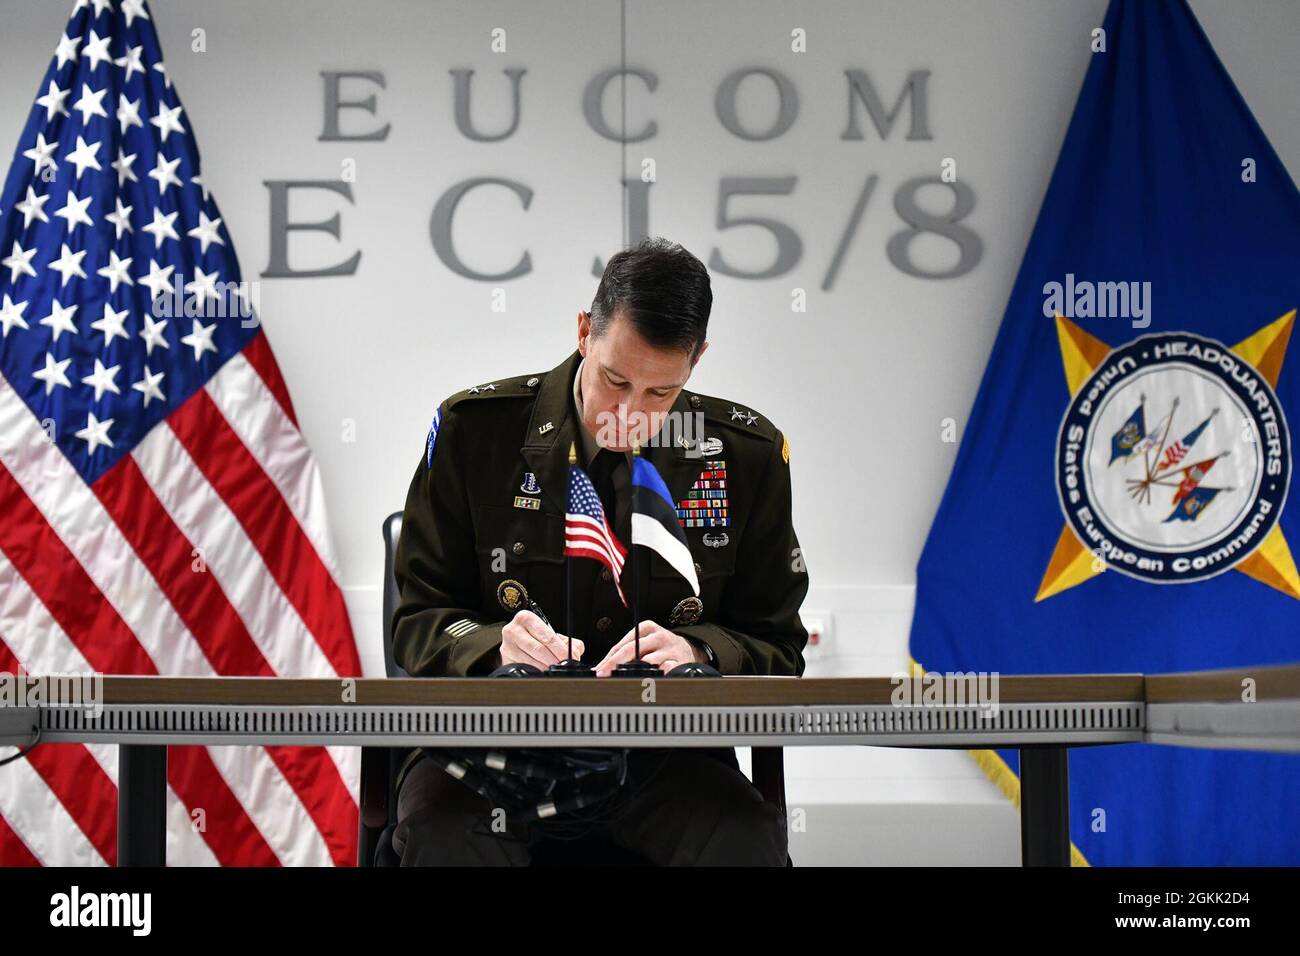 U.S. Army Maj. Gen. Charles Miller, U.S. European Command's Director of plans, policy, strategy and capabilities, signs an agreement to establish an Estonian liaison officer on the USEUCOM headquarters staff during a virtual signing ceremony, May 11, 2021. The Estonian officer is excpeted to arrive this summer and will join liaison officers from 11 other countries in the command's Multinational Coordination Cell. Stock Photo